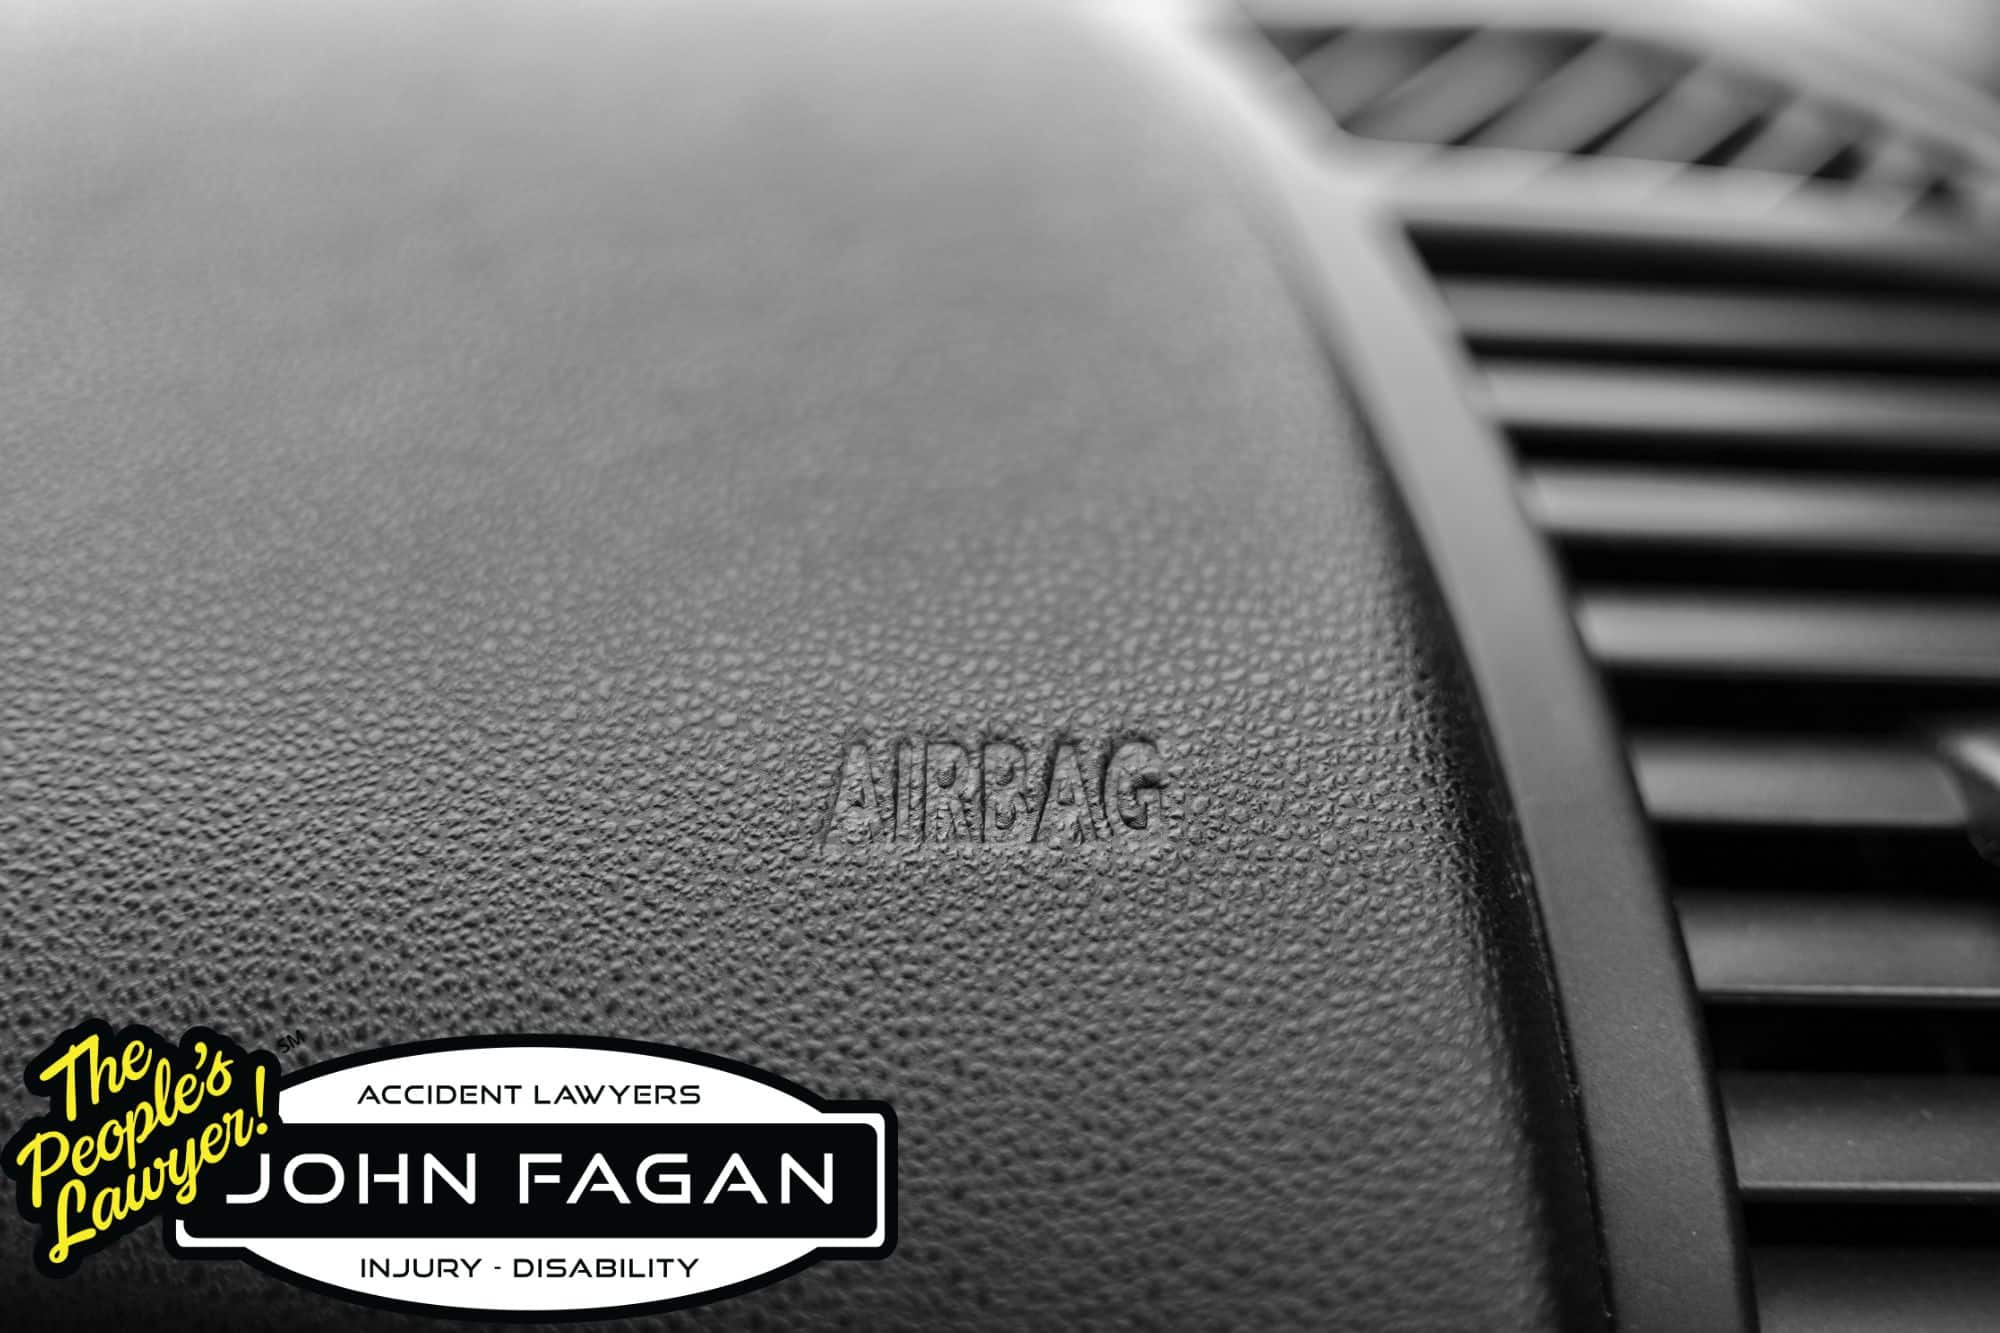 Recall on Takata airbags – Nearly two dozen vehicle brands affected By John Fagan More than two dozen automakers are recalling frontal airbags, made by major parts supplier Takata, for both the driver and passenger